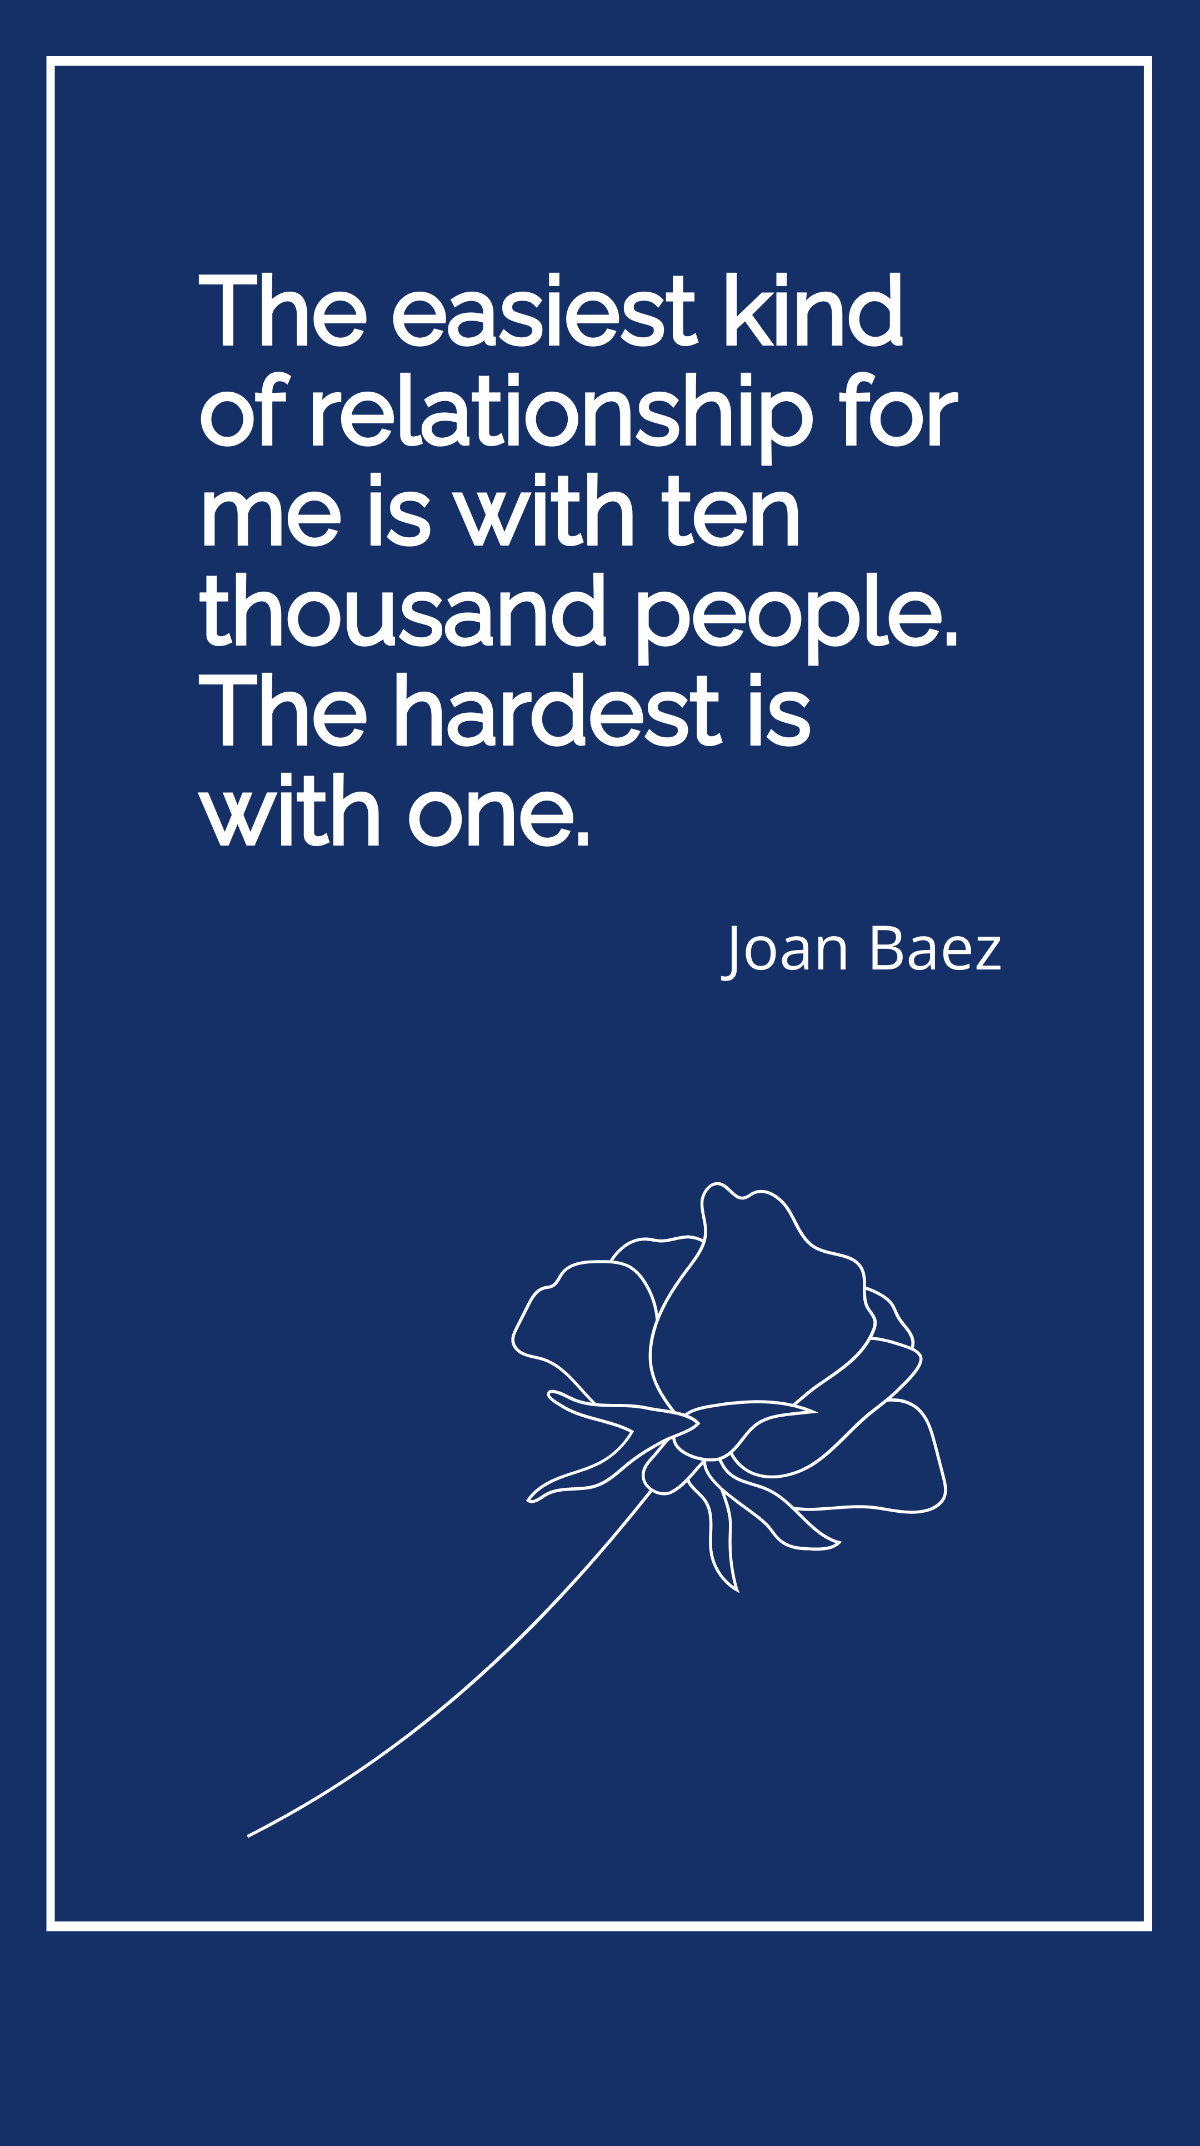 Joan Baez - The easiest kind of relationship for me is with ten thousand people. The hardest is with one. Template